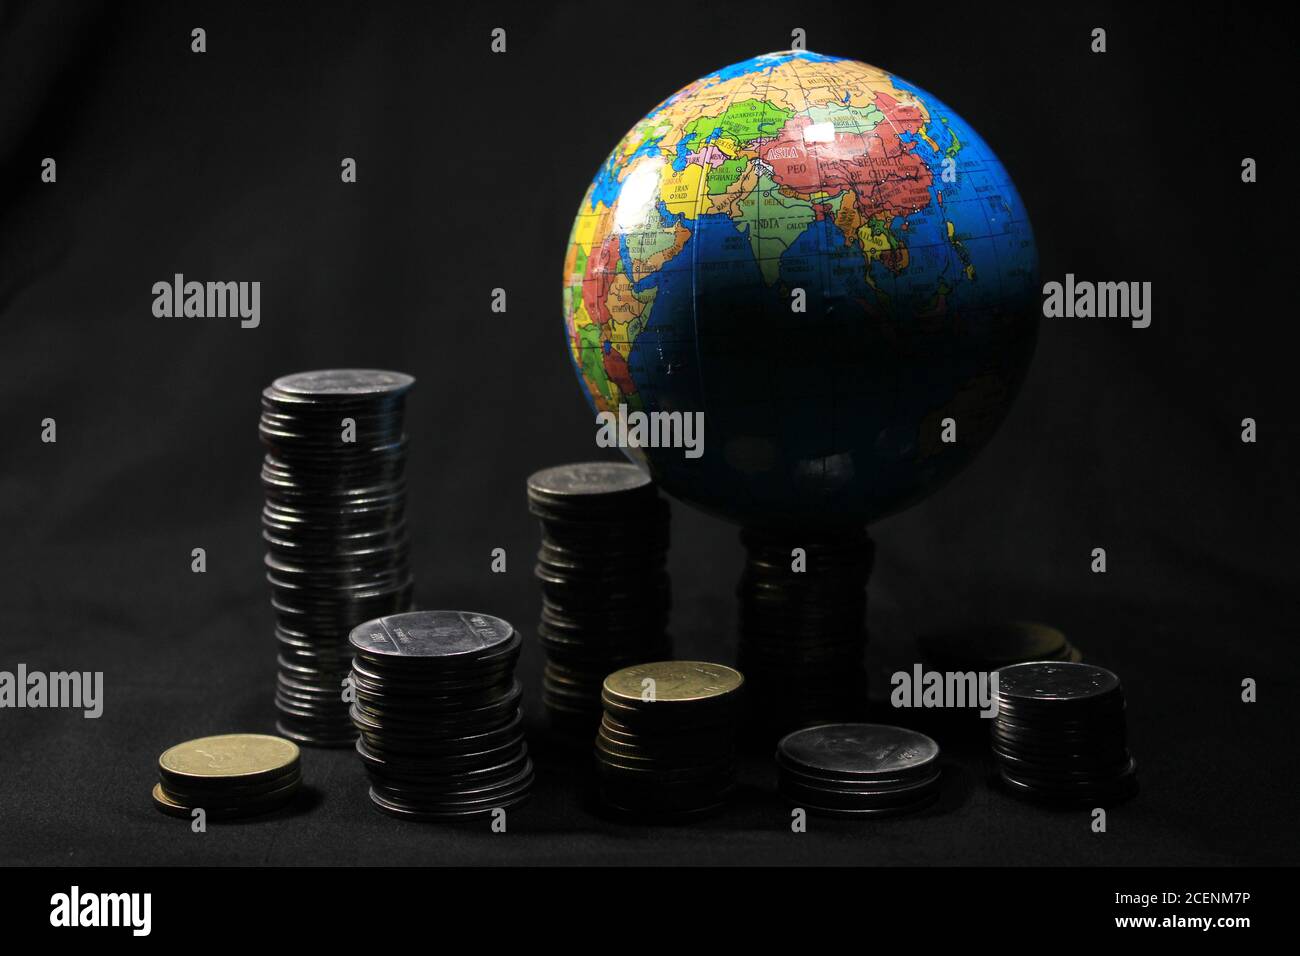 Stock pile of 1, 2, 5, 10 Indian rupee metal coin currency with globe isolated on black background. Financial, economy, investment concept. Stock Photo